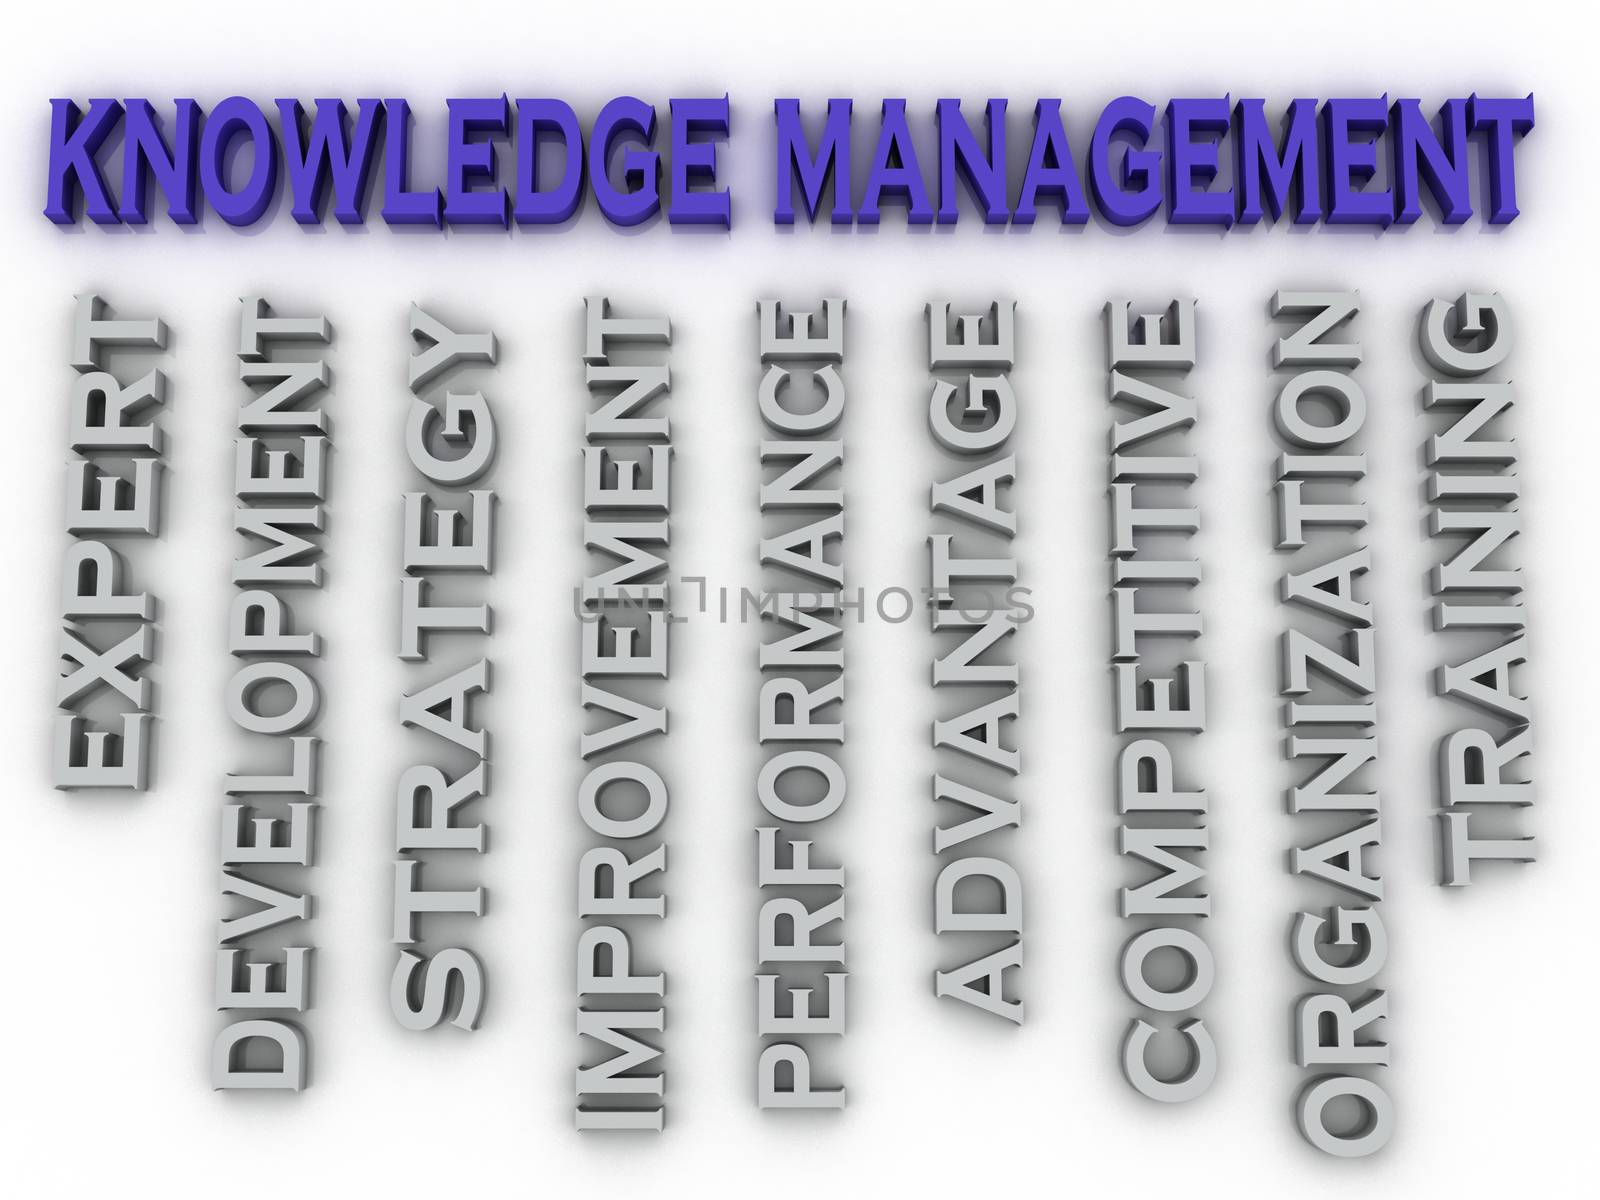 3d image knowledge management issues concept word cloud backgr by dacasdo